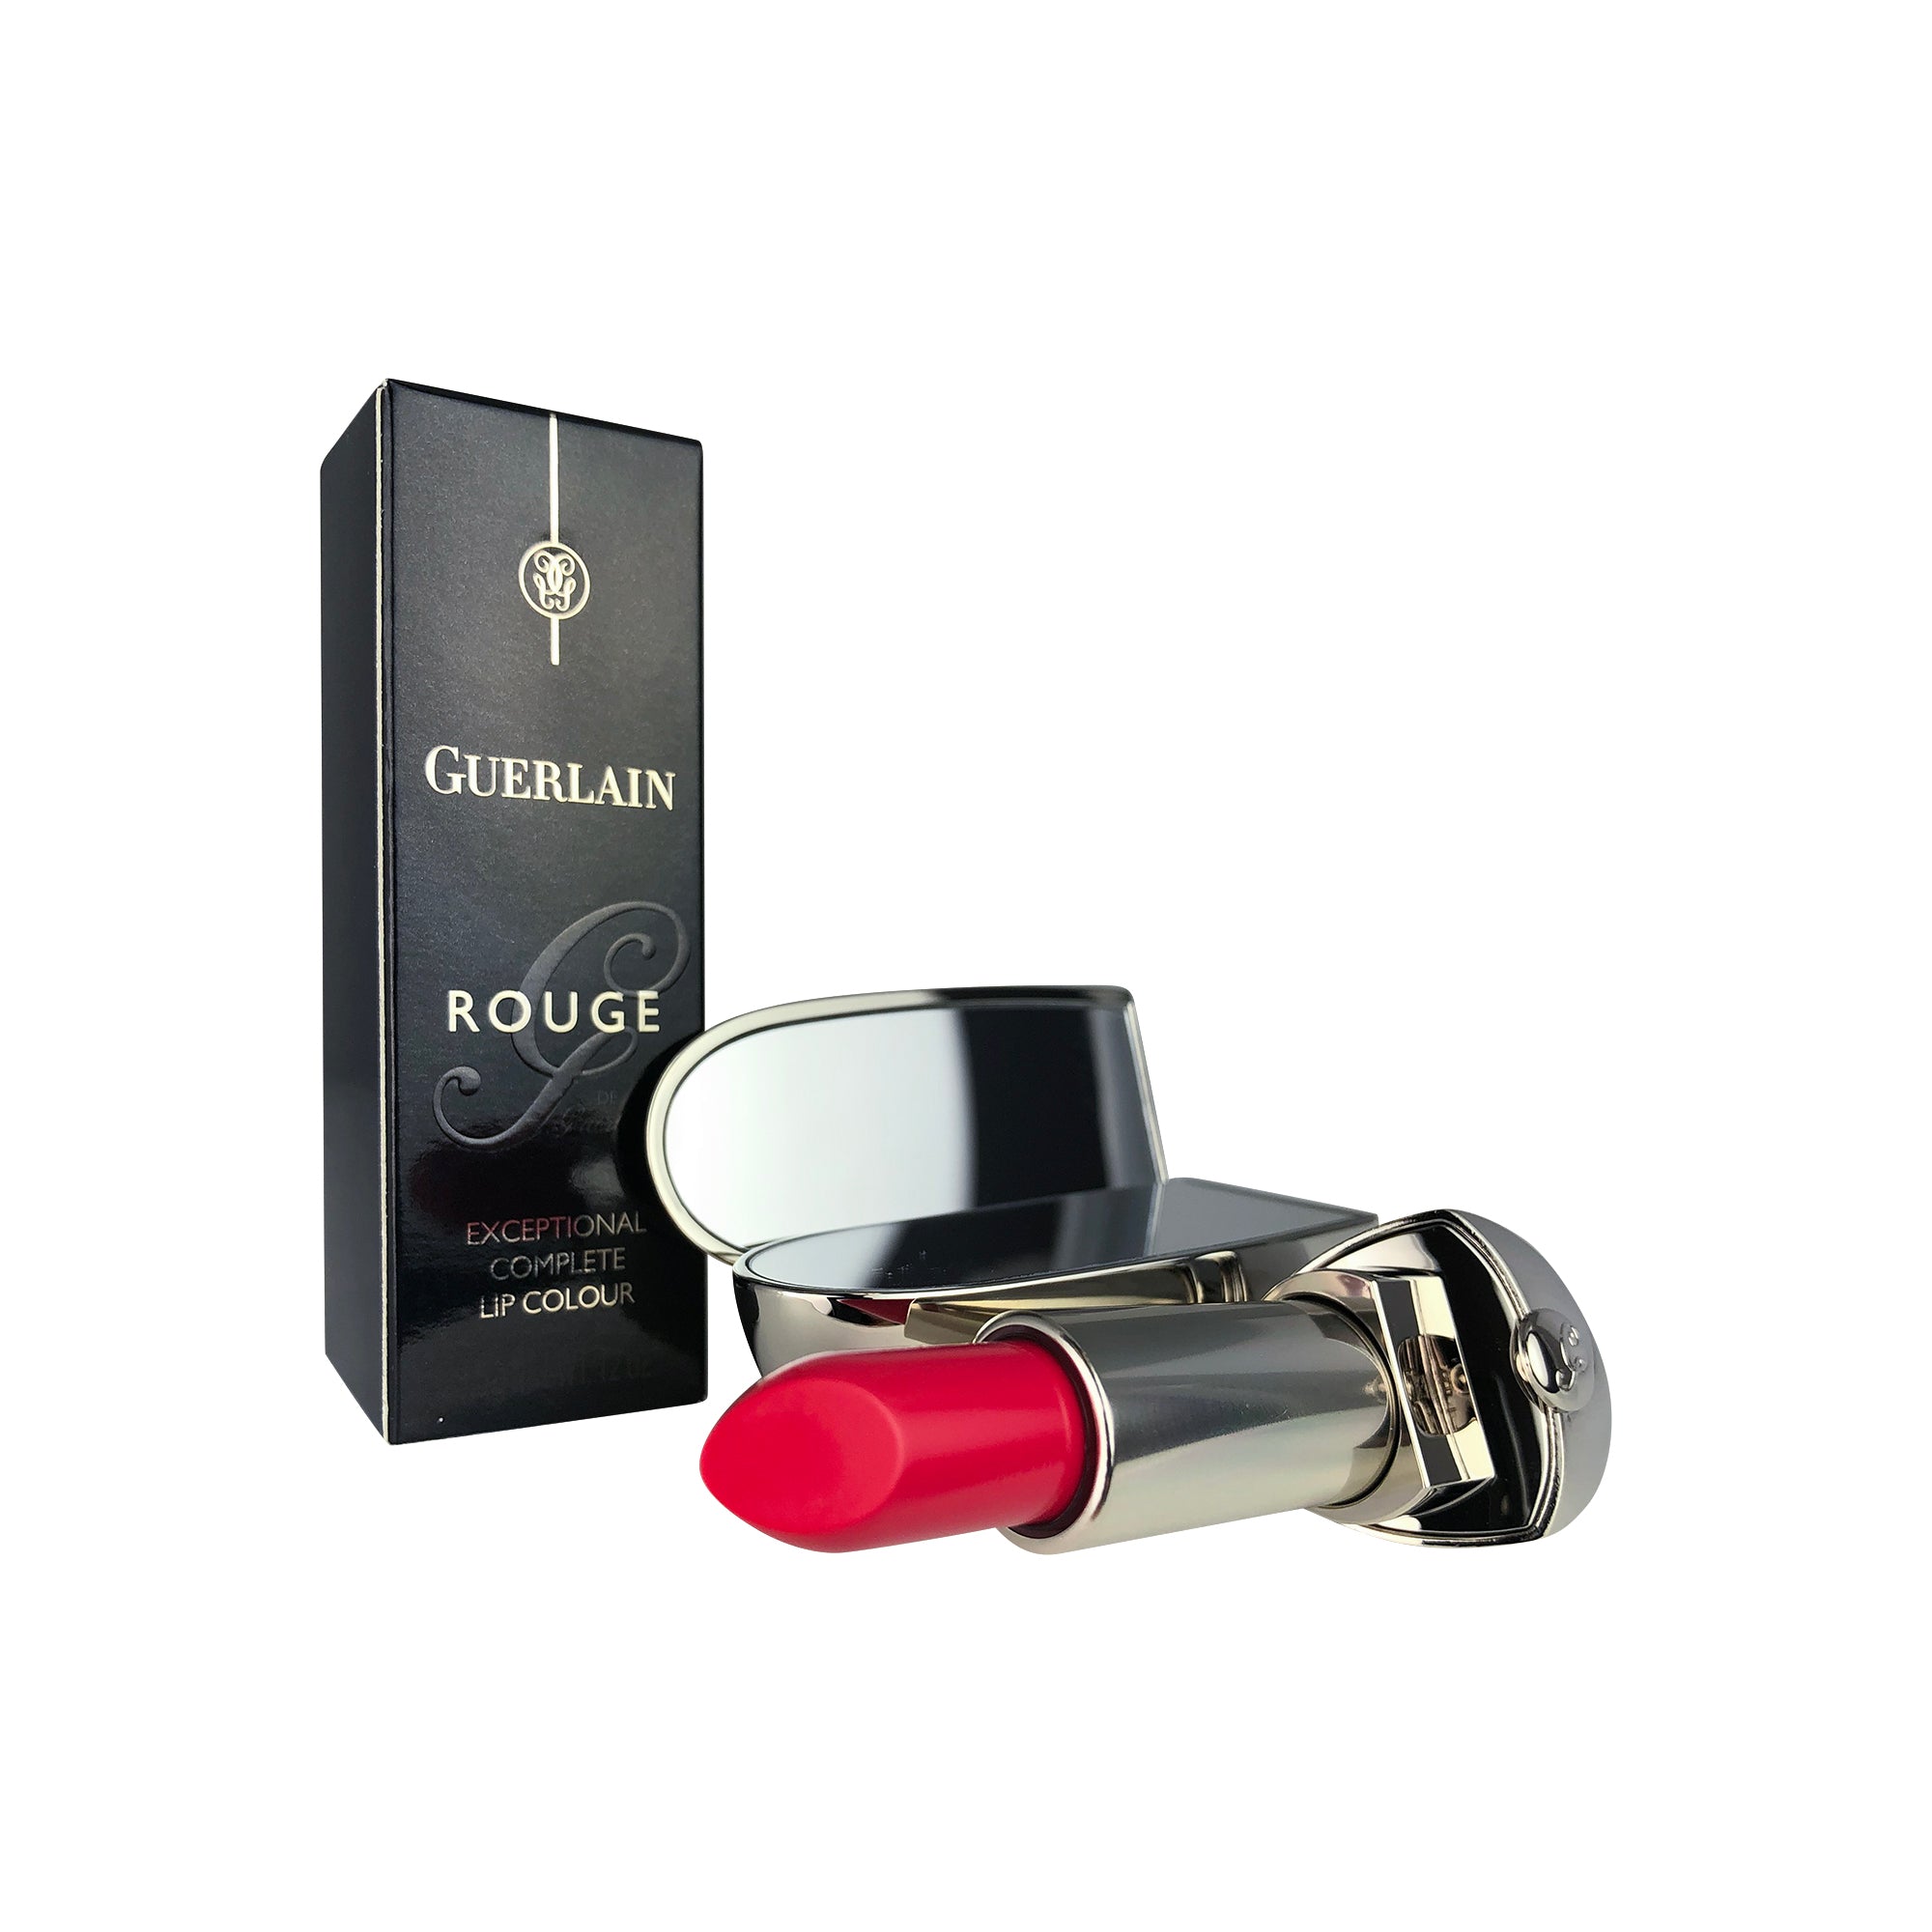 Guerlain Rouge Exceptional Complete Lip Colour with Mirror #71 Girly .12oz